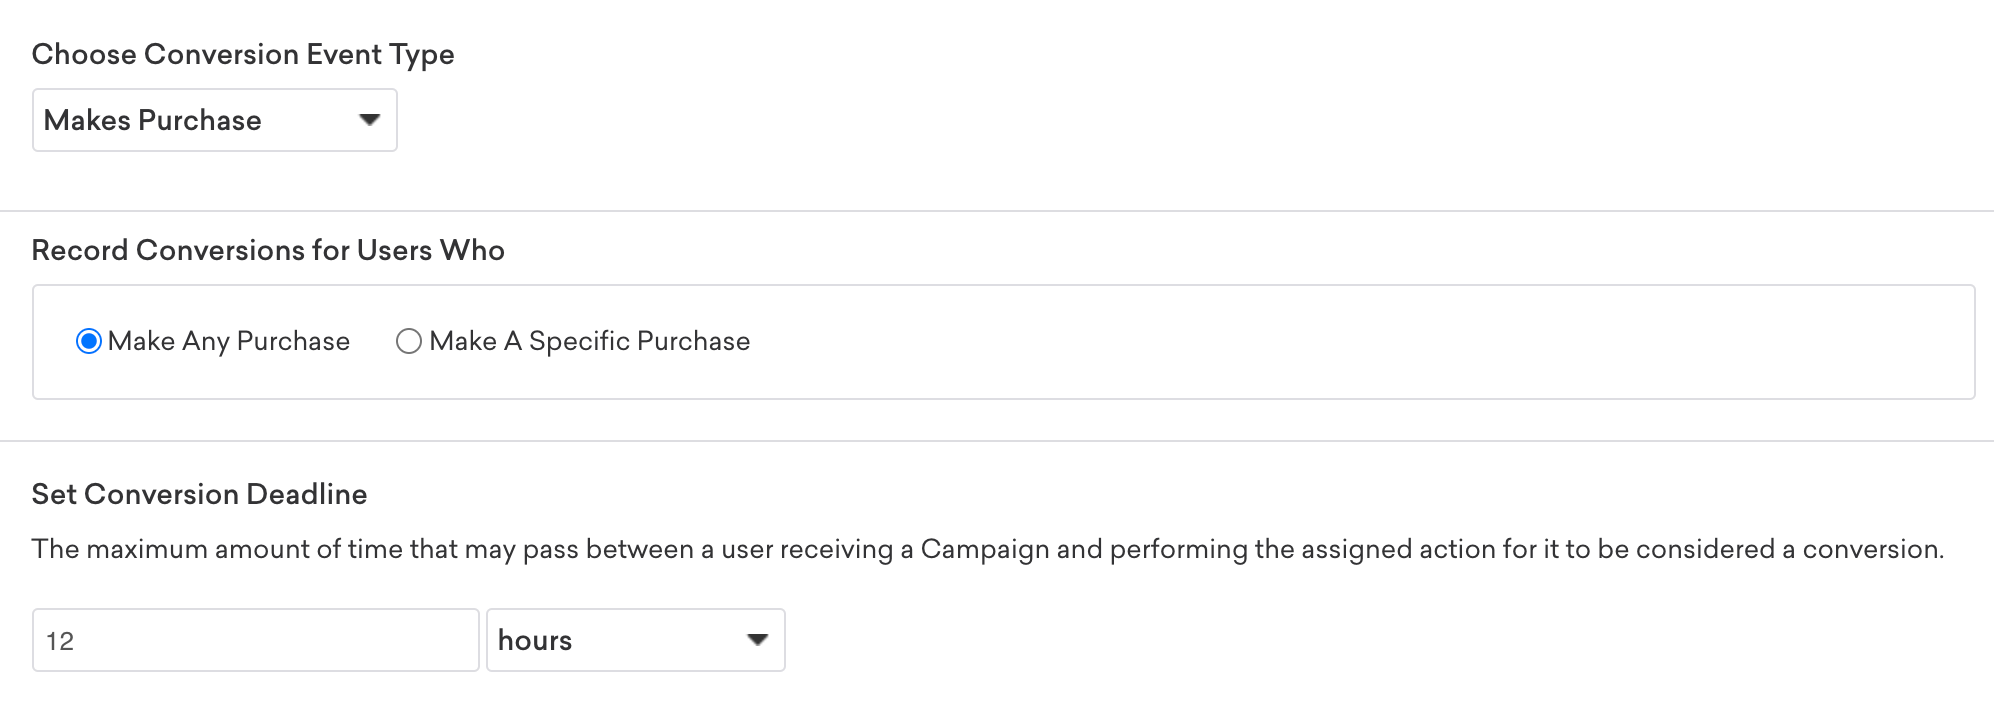 The "Makes Purchase" conversion event type as an example to record conversions for users who make any purchase. This has a conversion deadline of 12 hours.